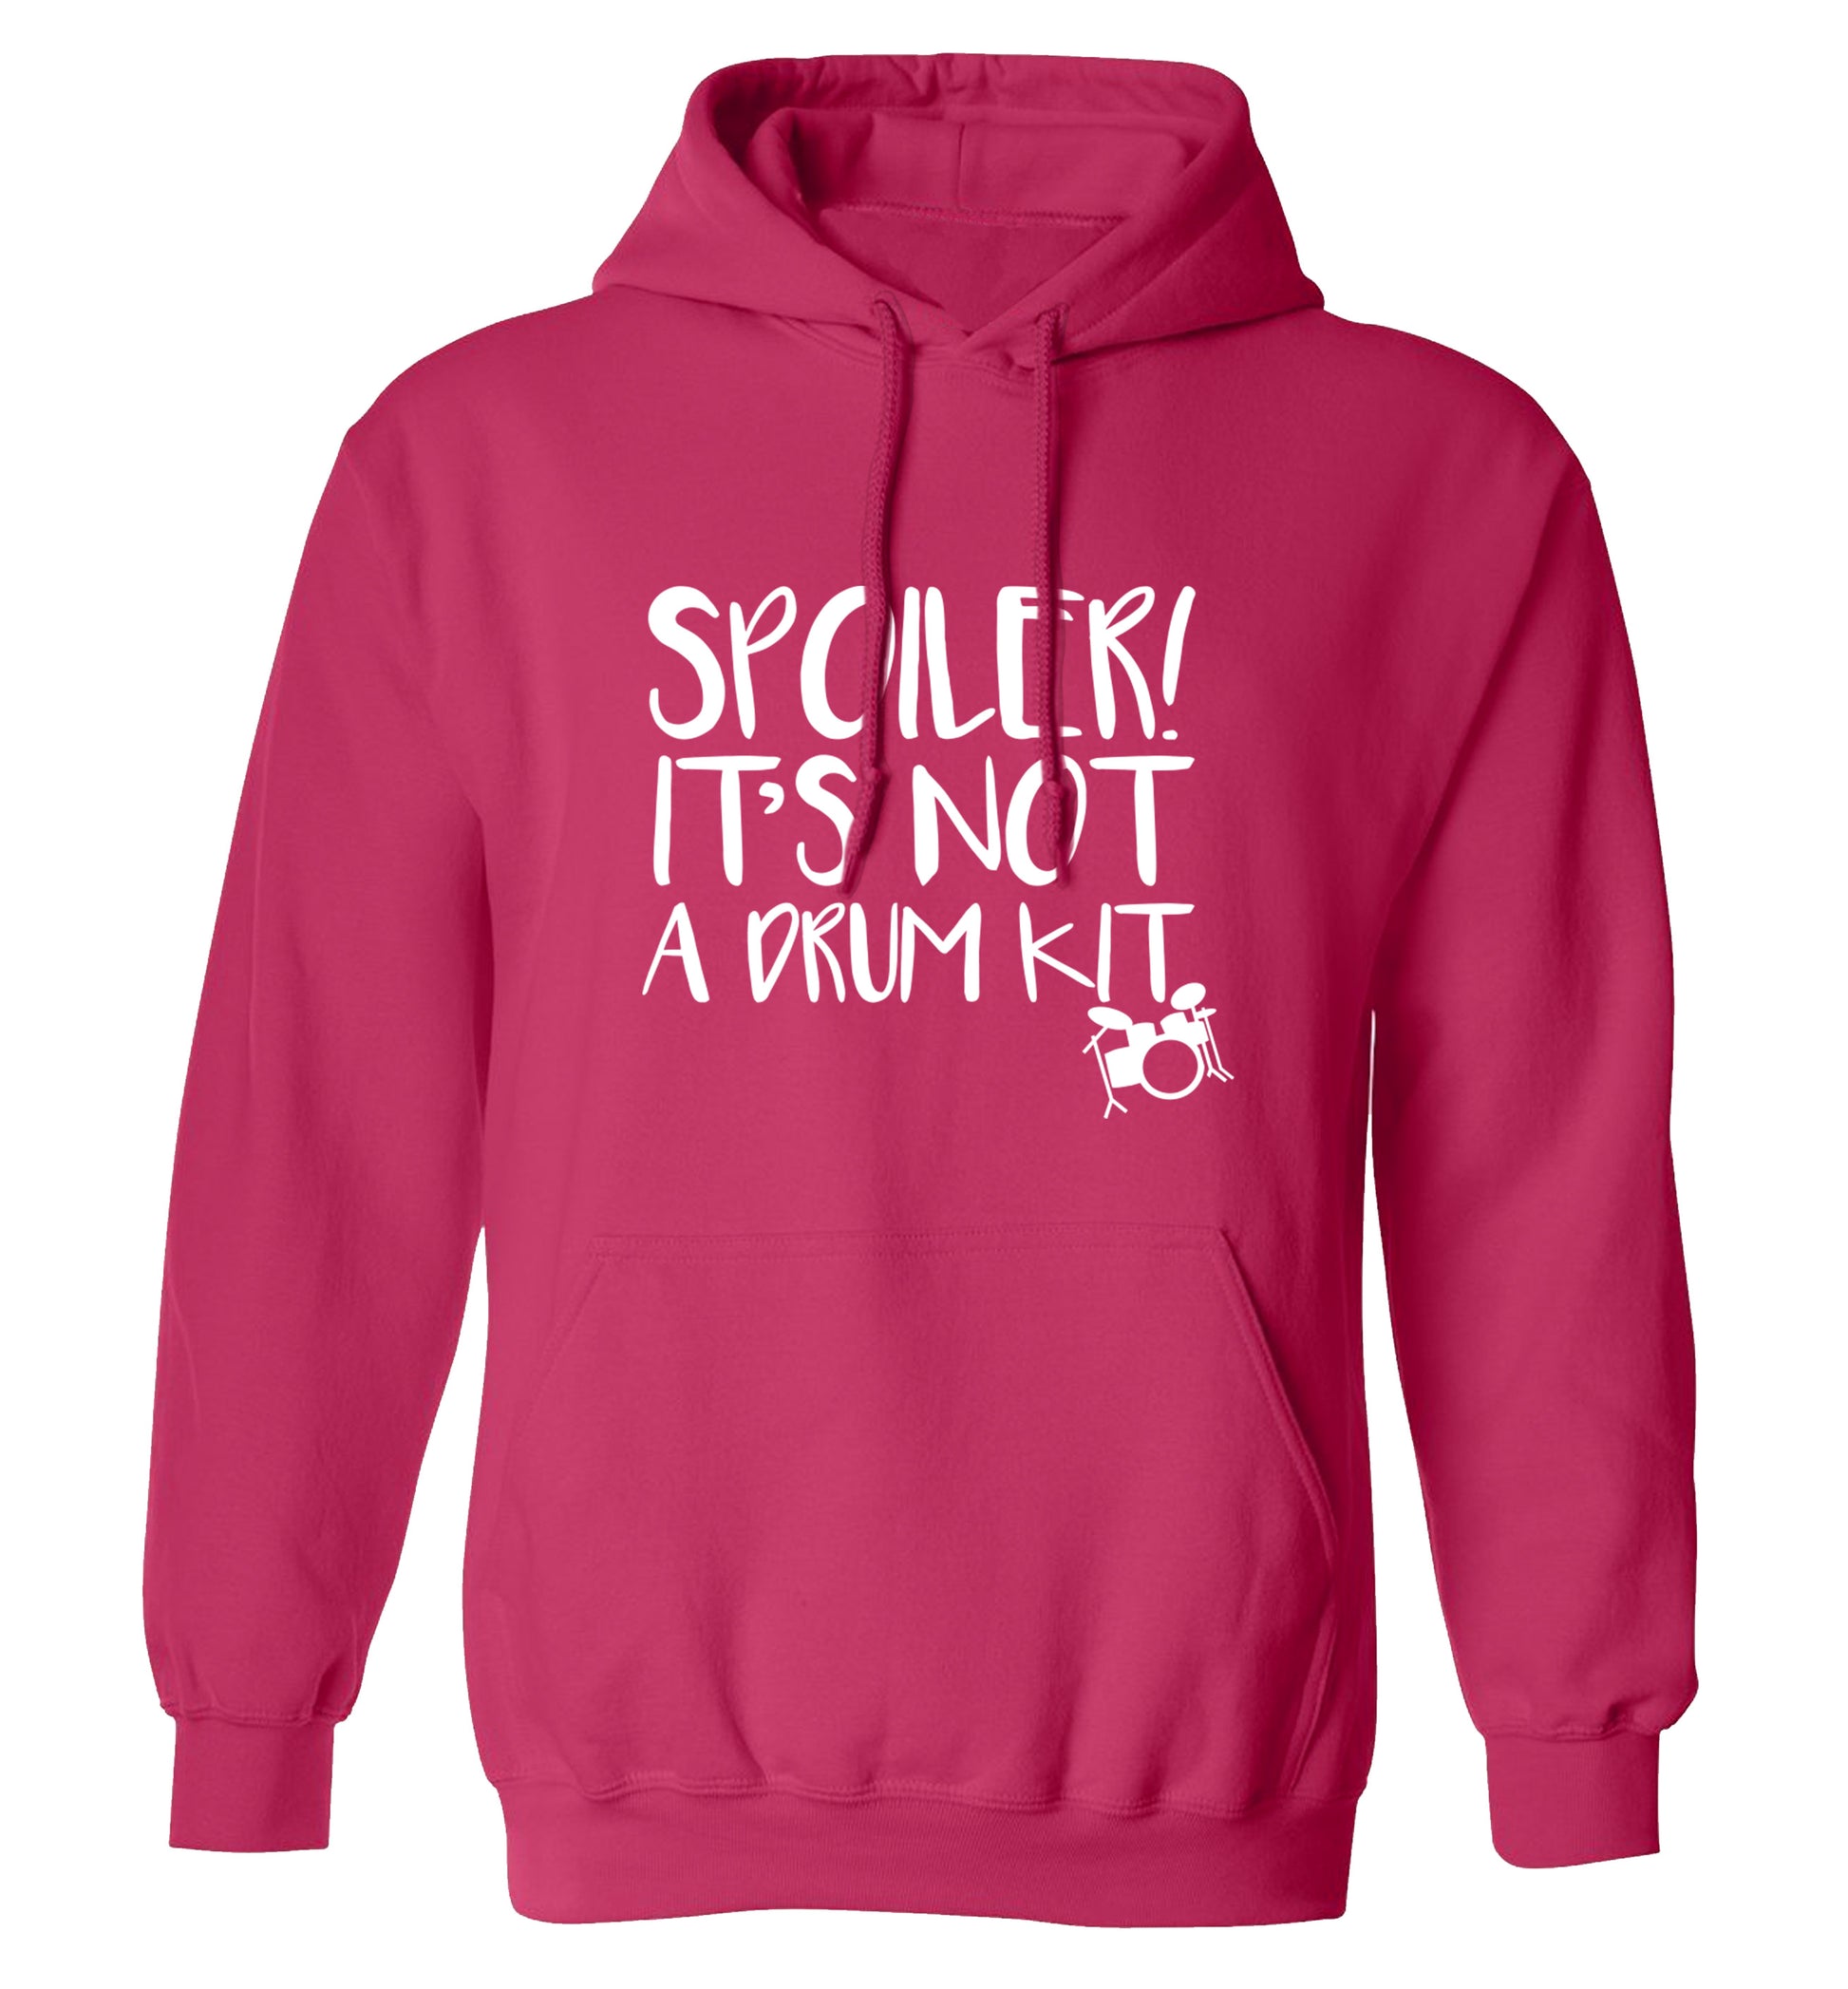 Spoiler it's not a drum kit adults unisex pink hoodie 2XL